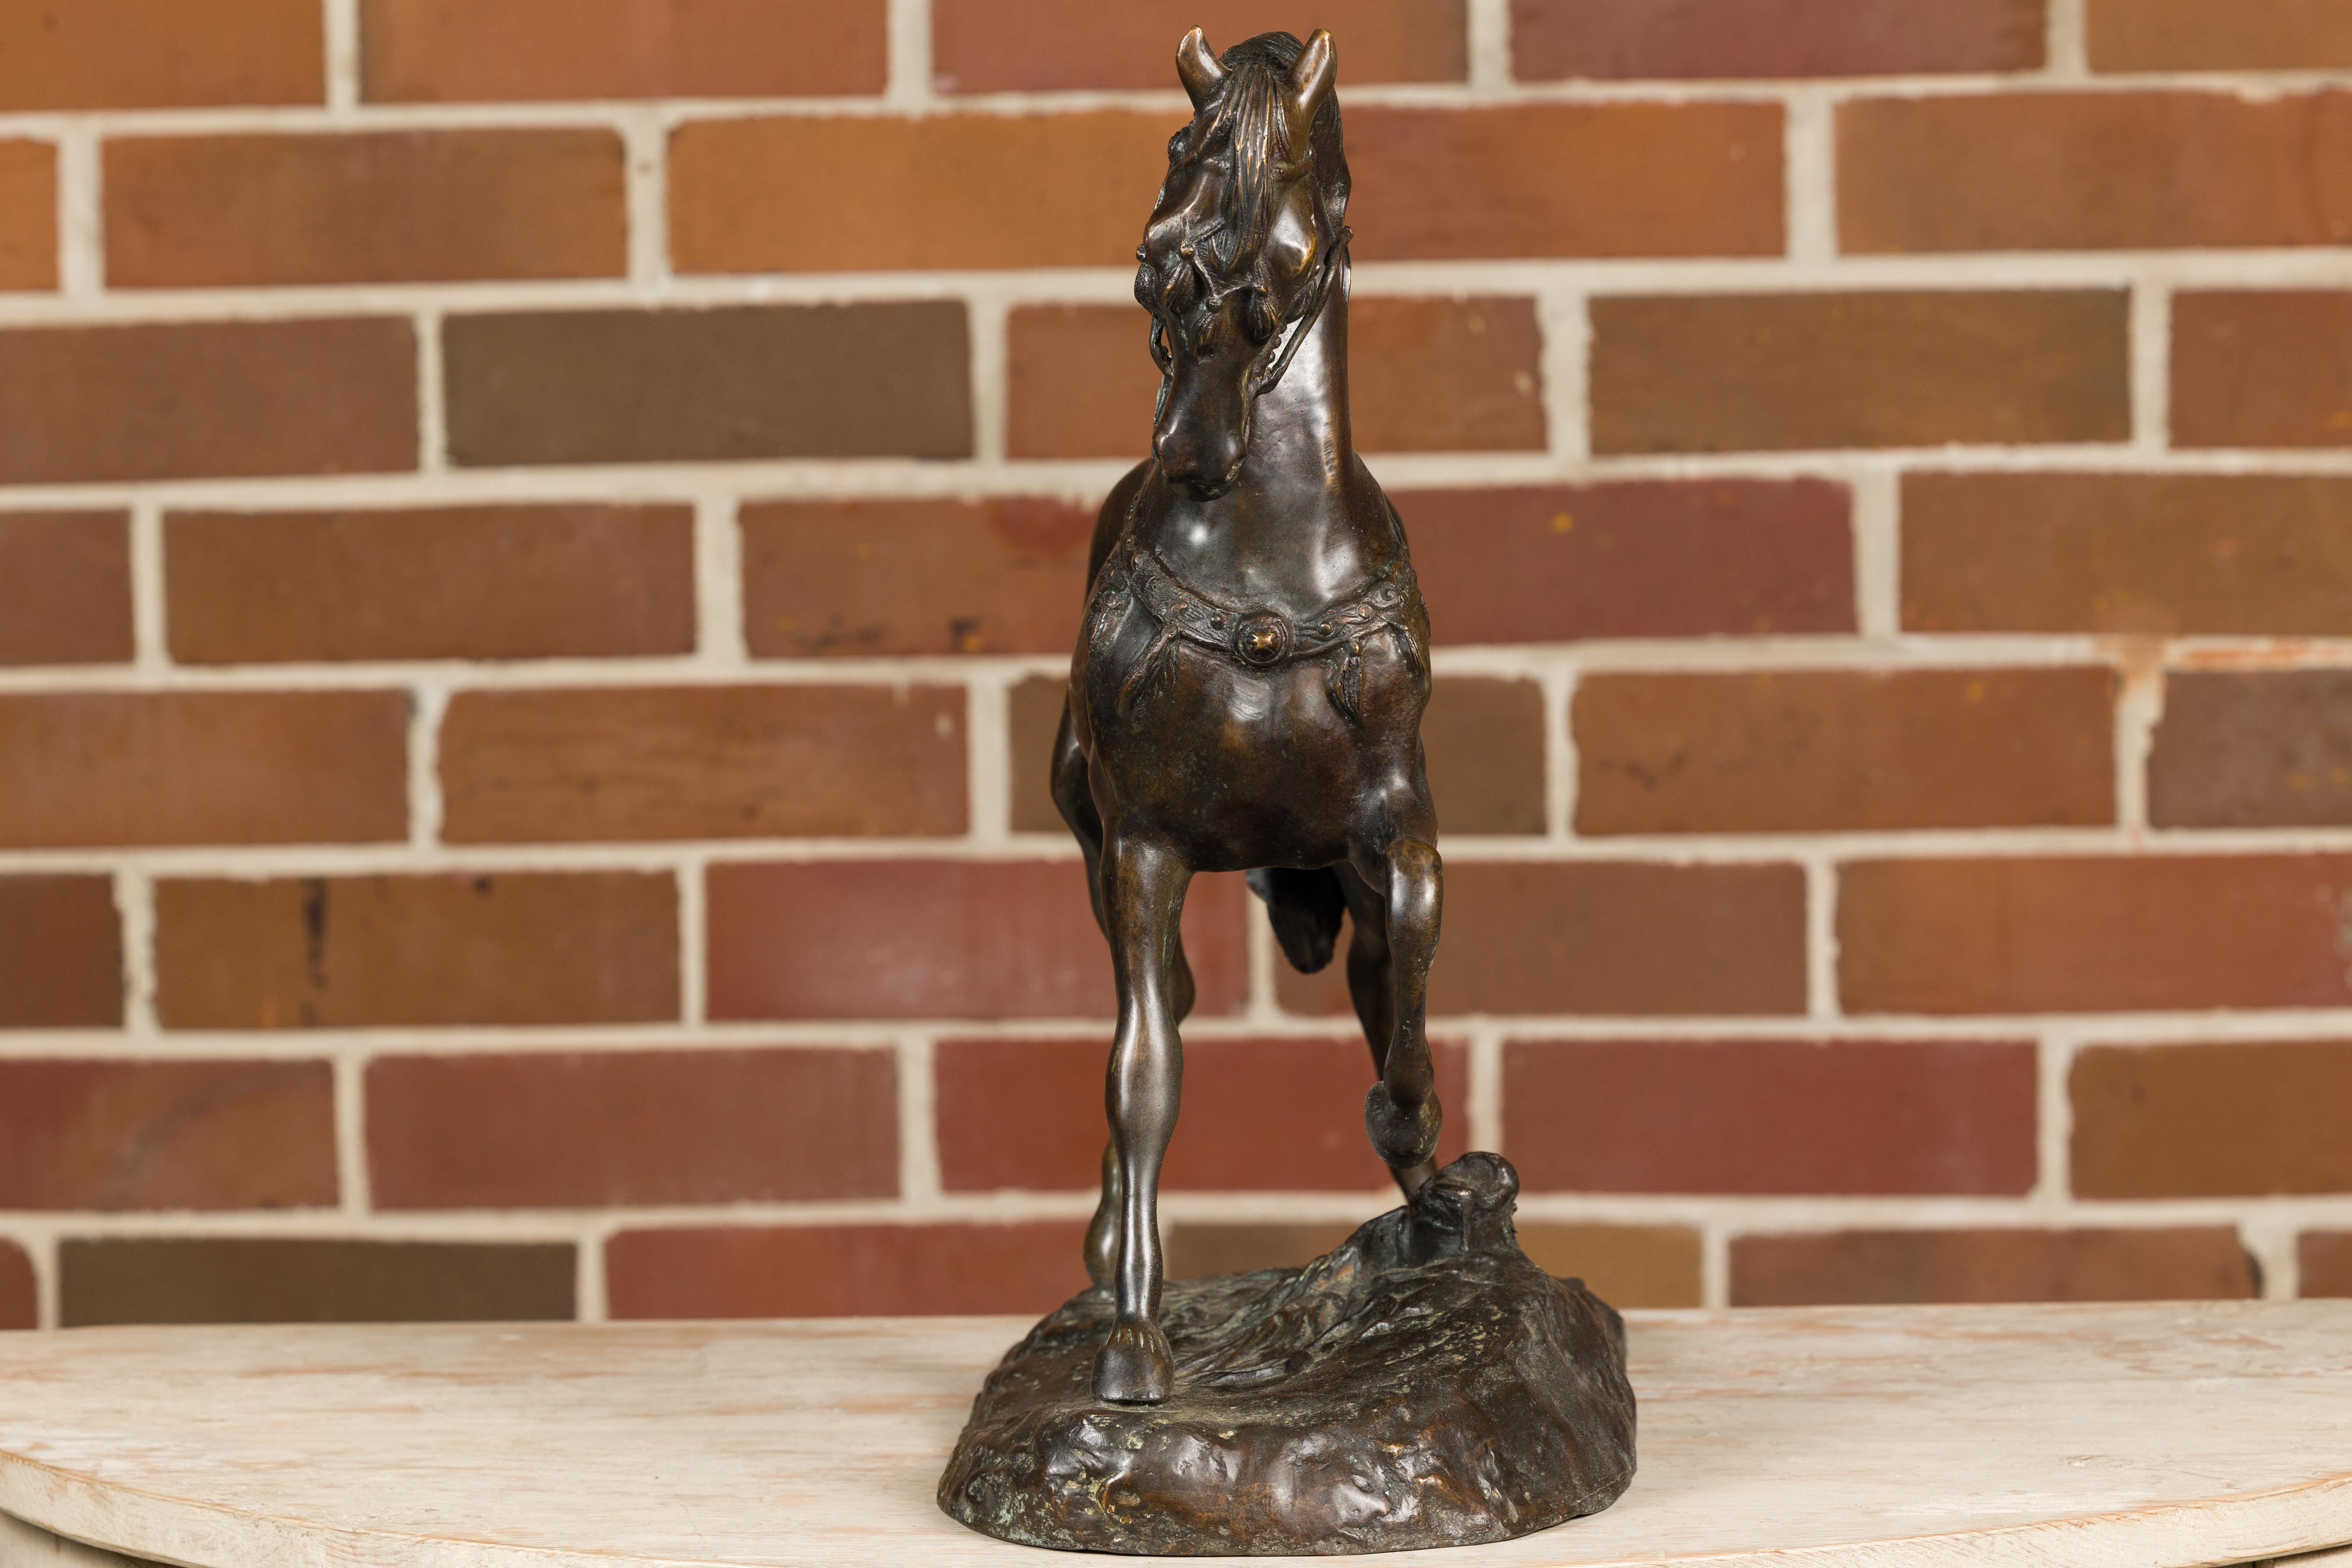 19th Century Antoine-Louis Barye Bronze Horse Sculpture with Left Foot Raised and Dark Patina For Sale